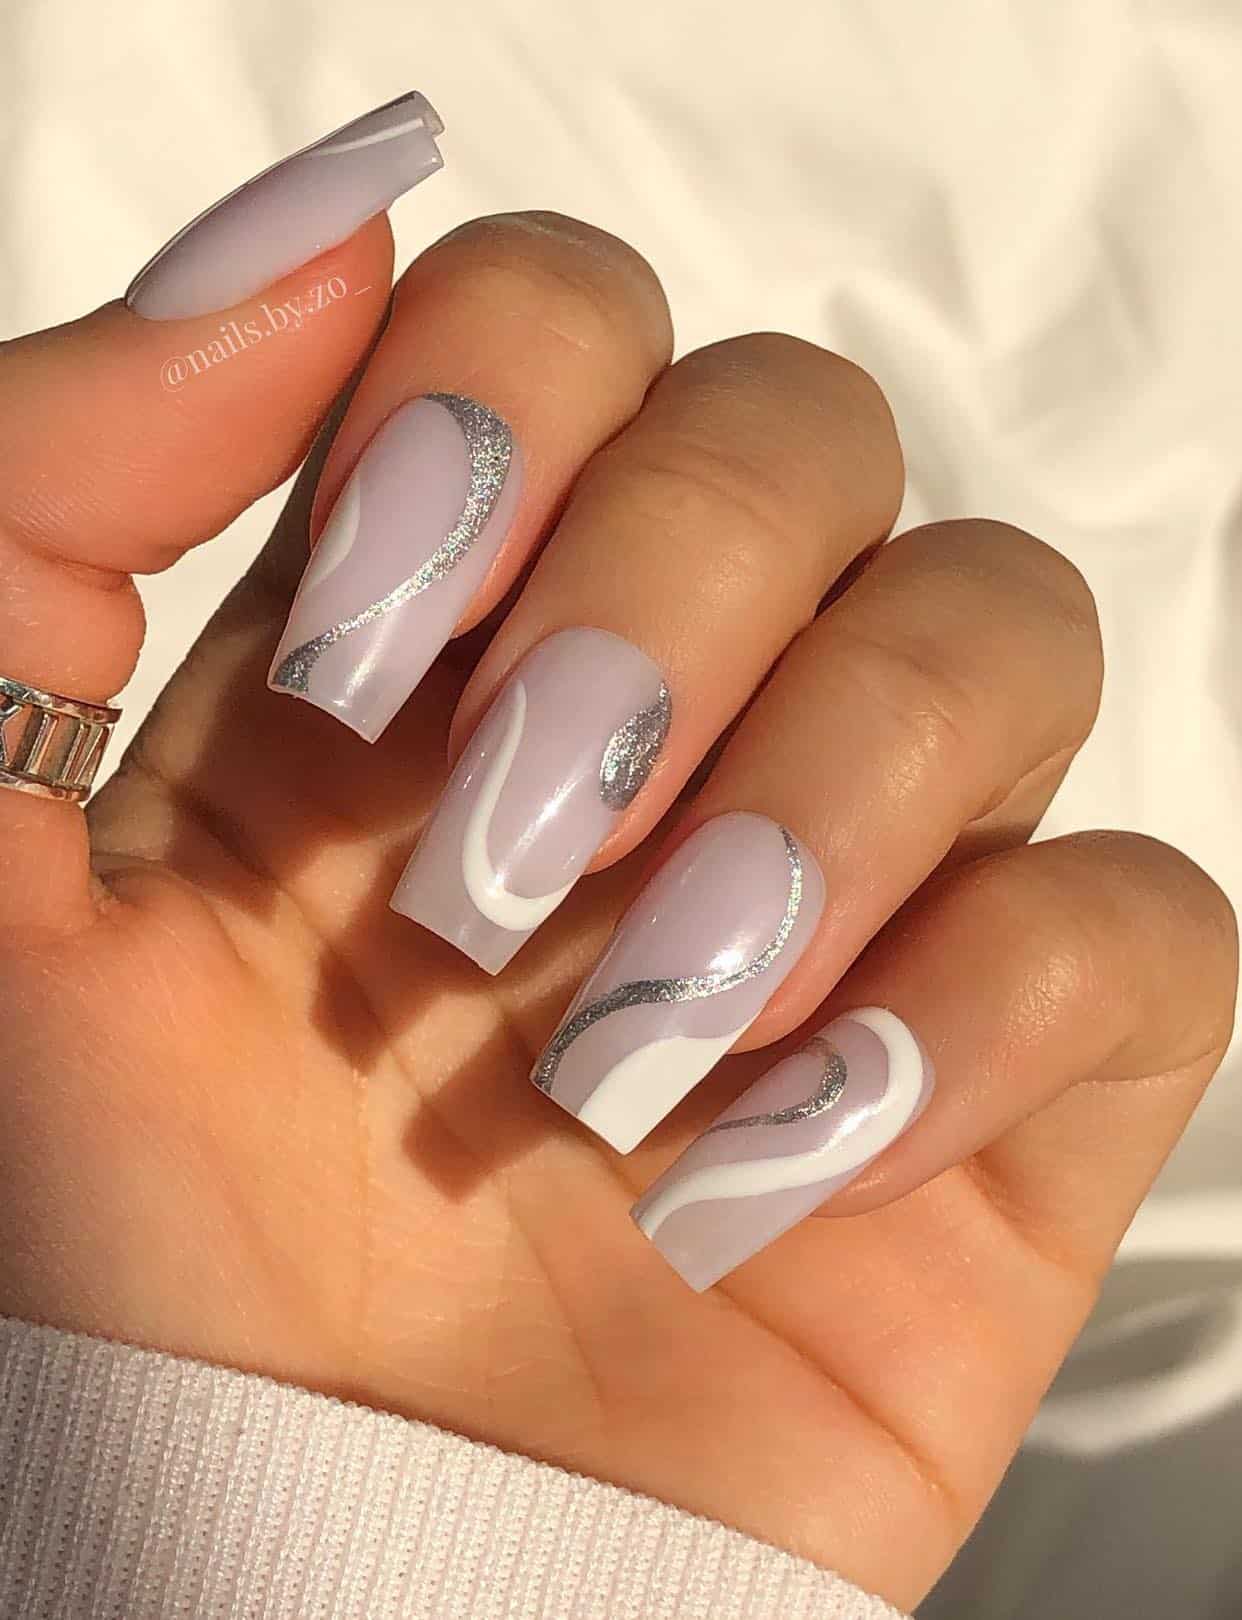 A hand with medium milky white square nails accented with silver and white swirls